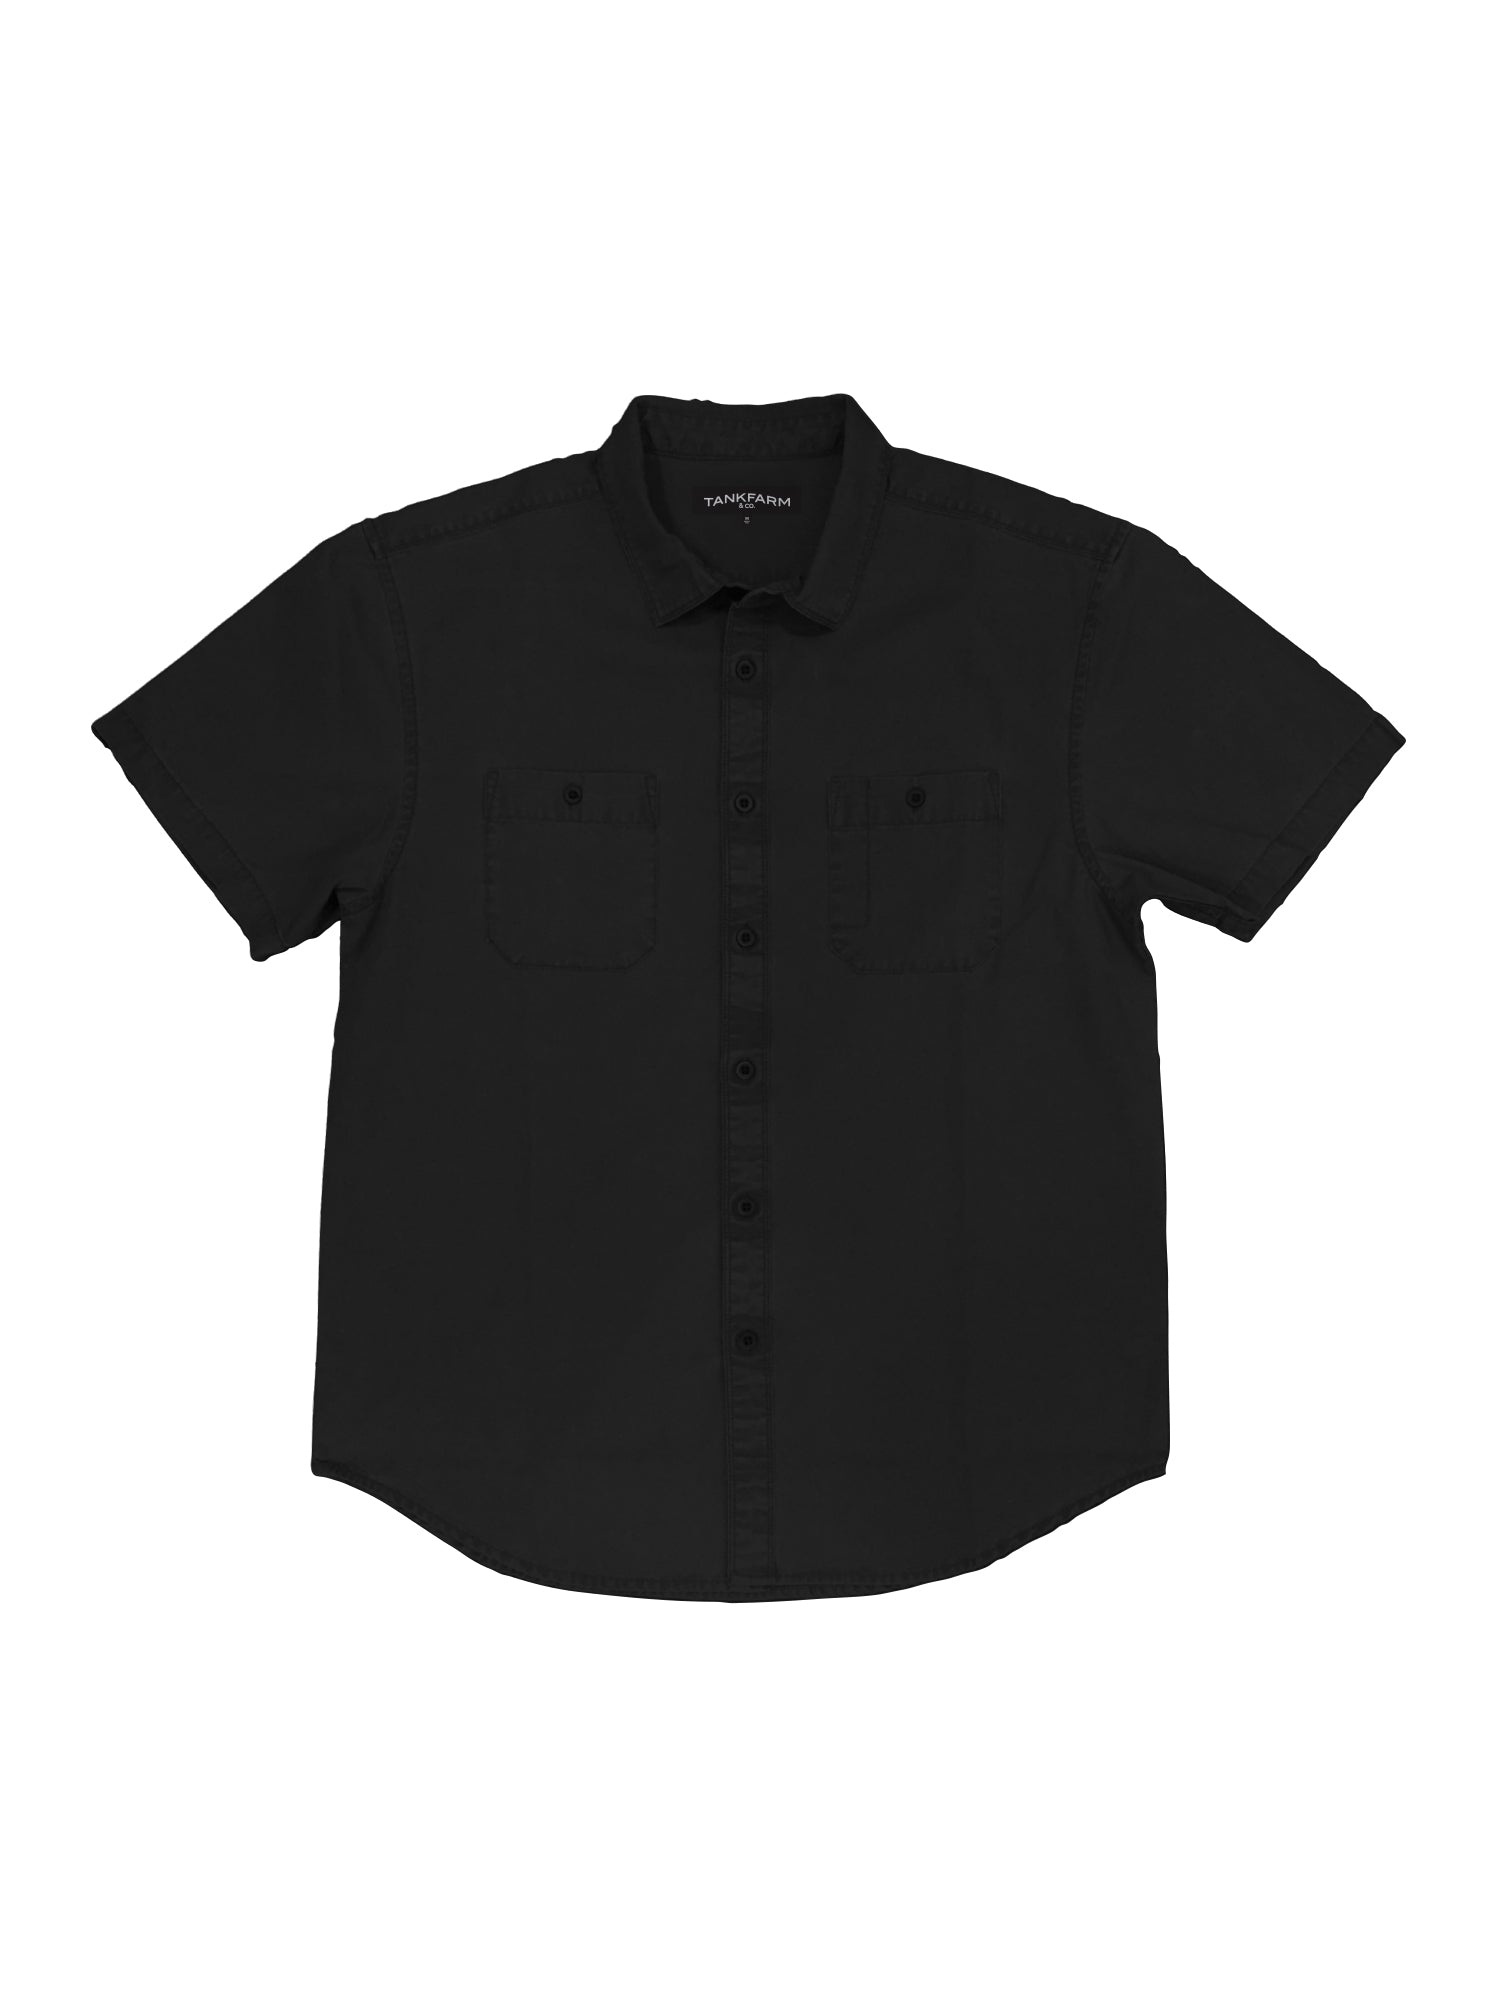 BLACK WORK SHIRT - Anderson Bros Design and Supply